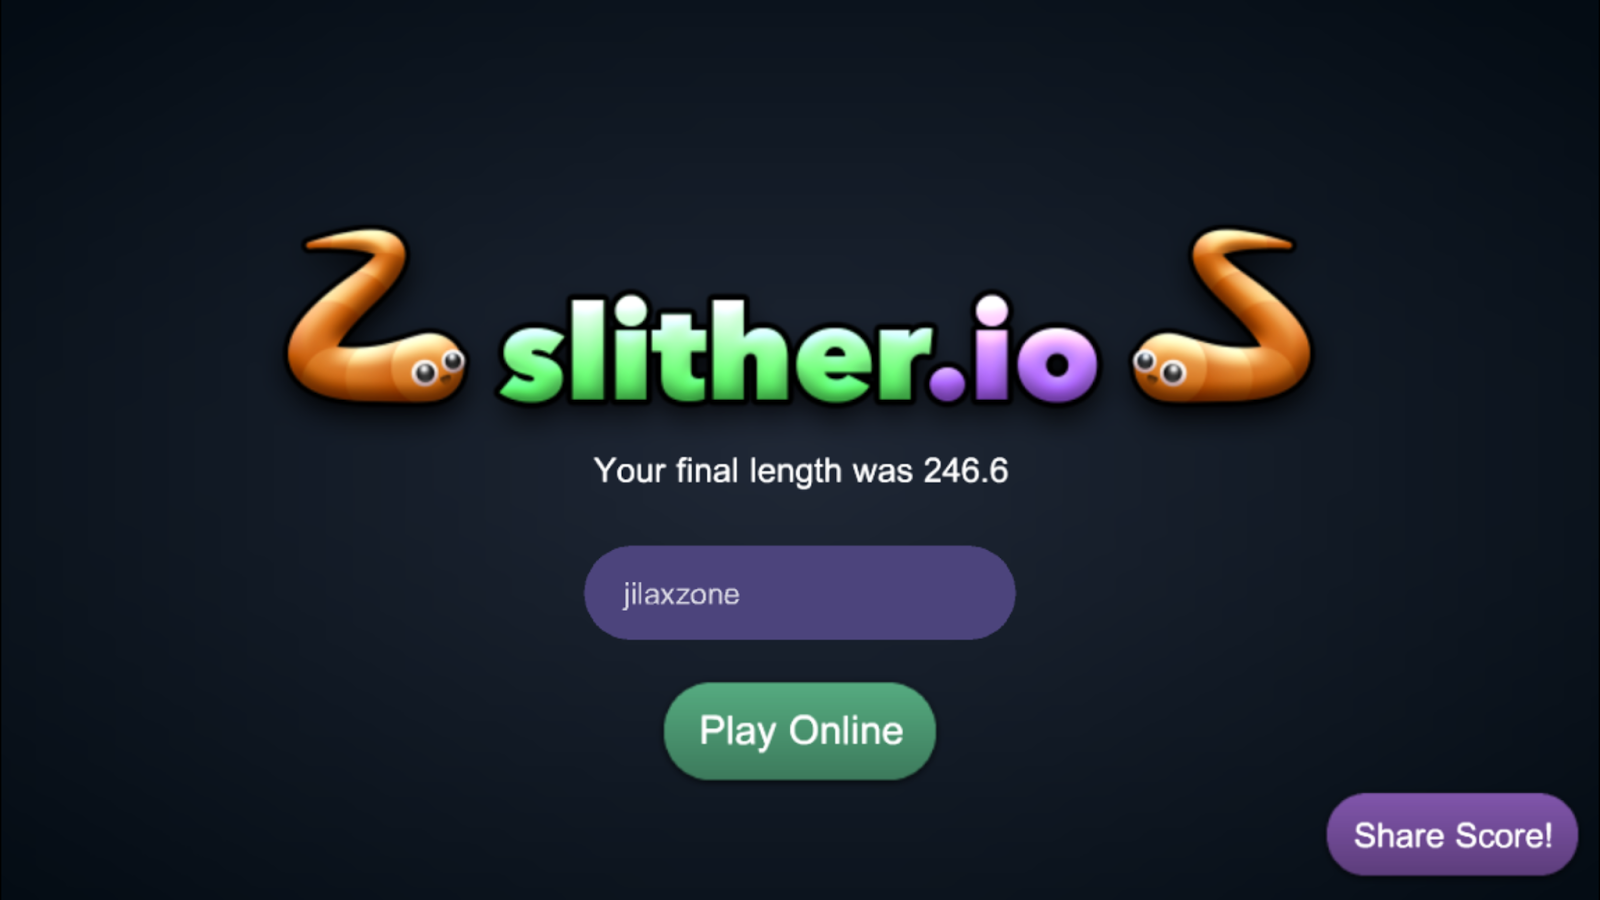 FREE IPHONE / IPAD / IOS APPS and GAMES Daily: [FREE iPHONE GAME] Slither.io ...1600 x 900